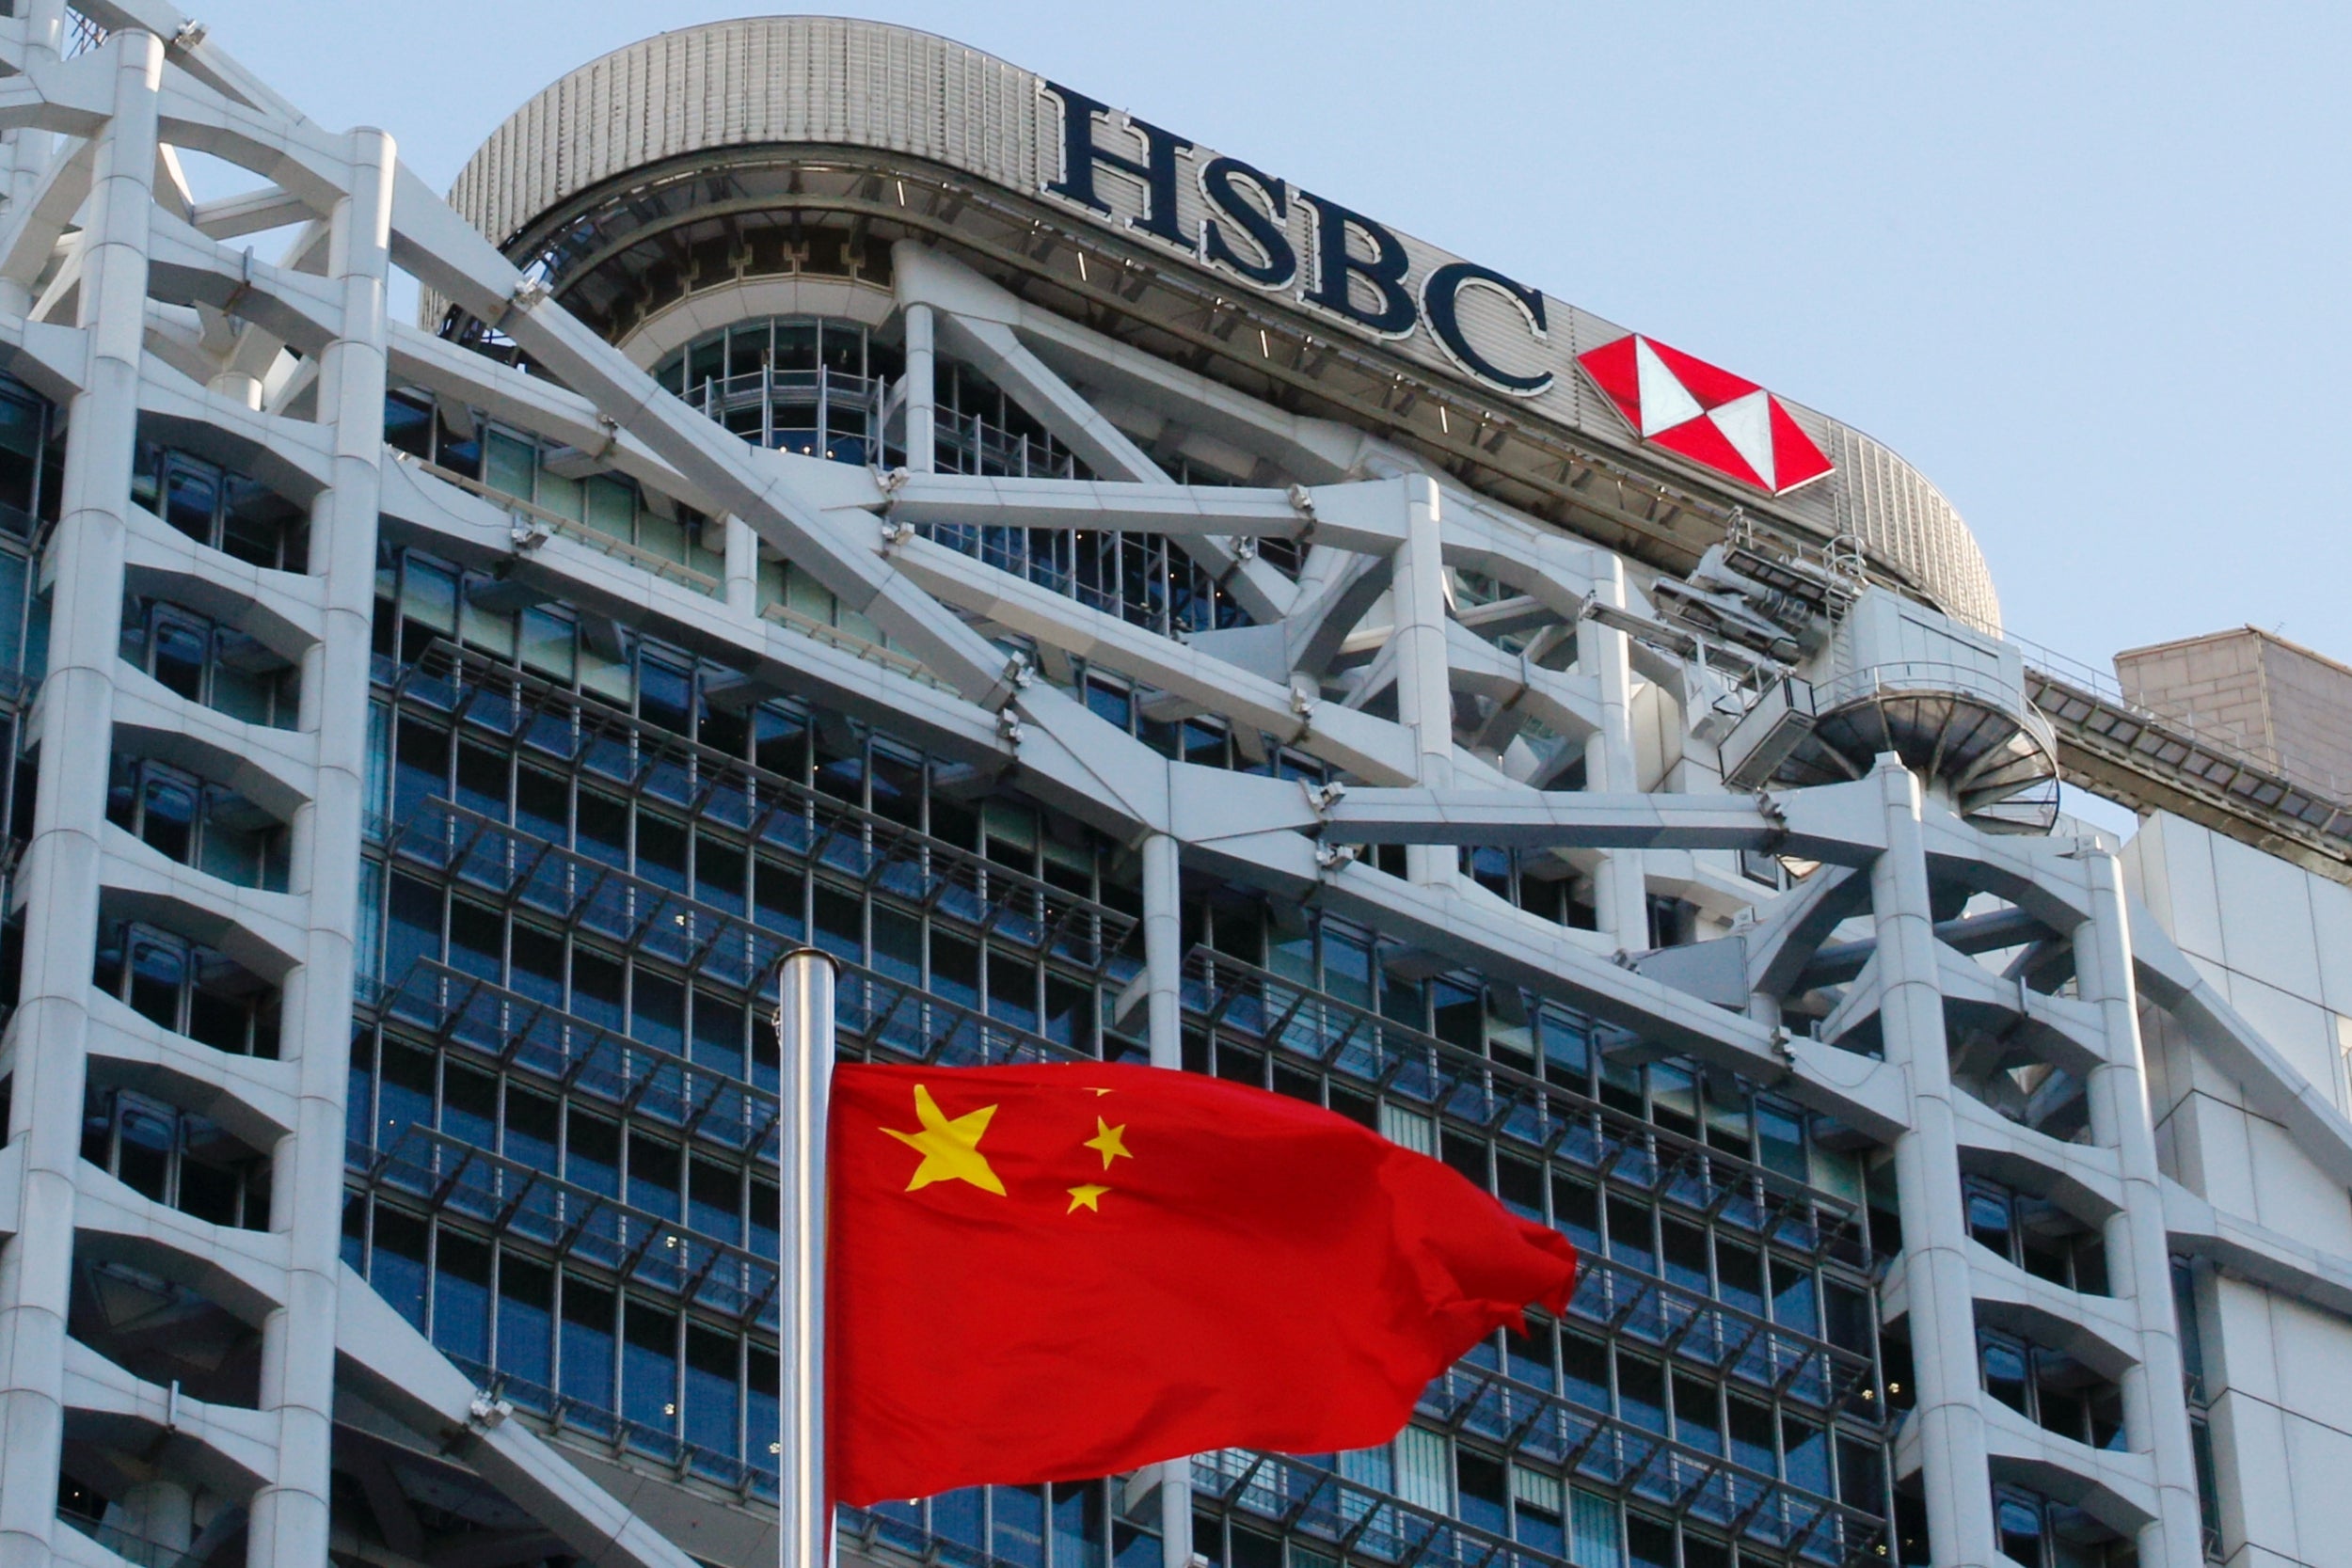 HSBC controversially followed Beijing in its national security laws giving sweeping powers over Hong Kong